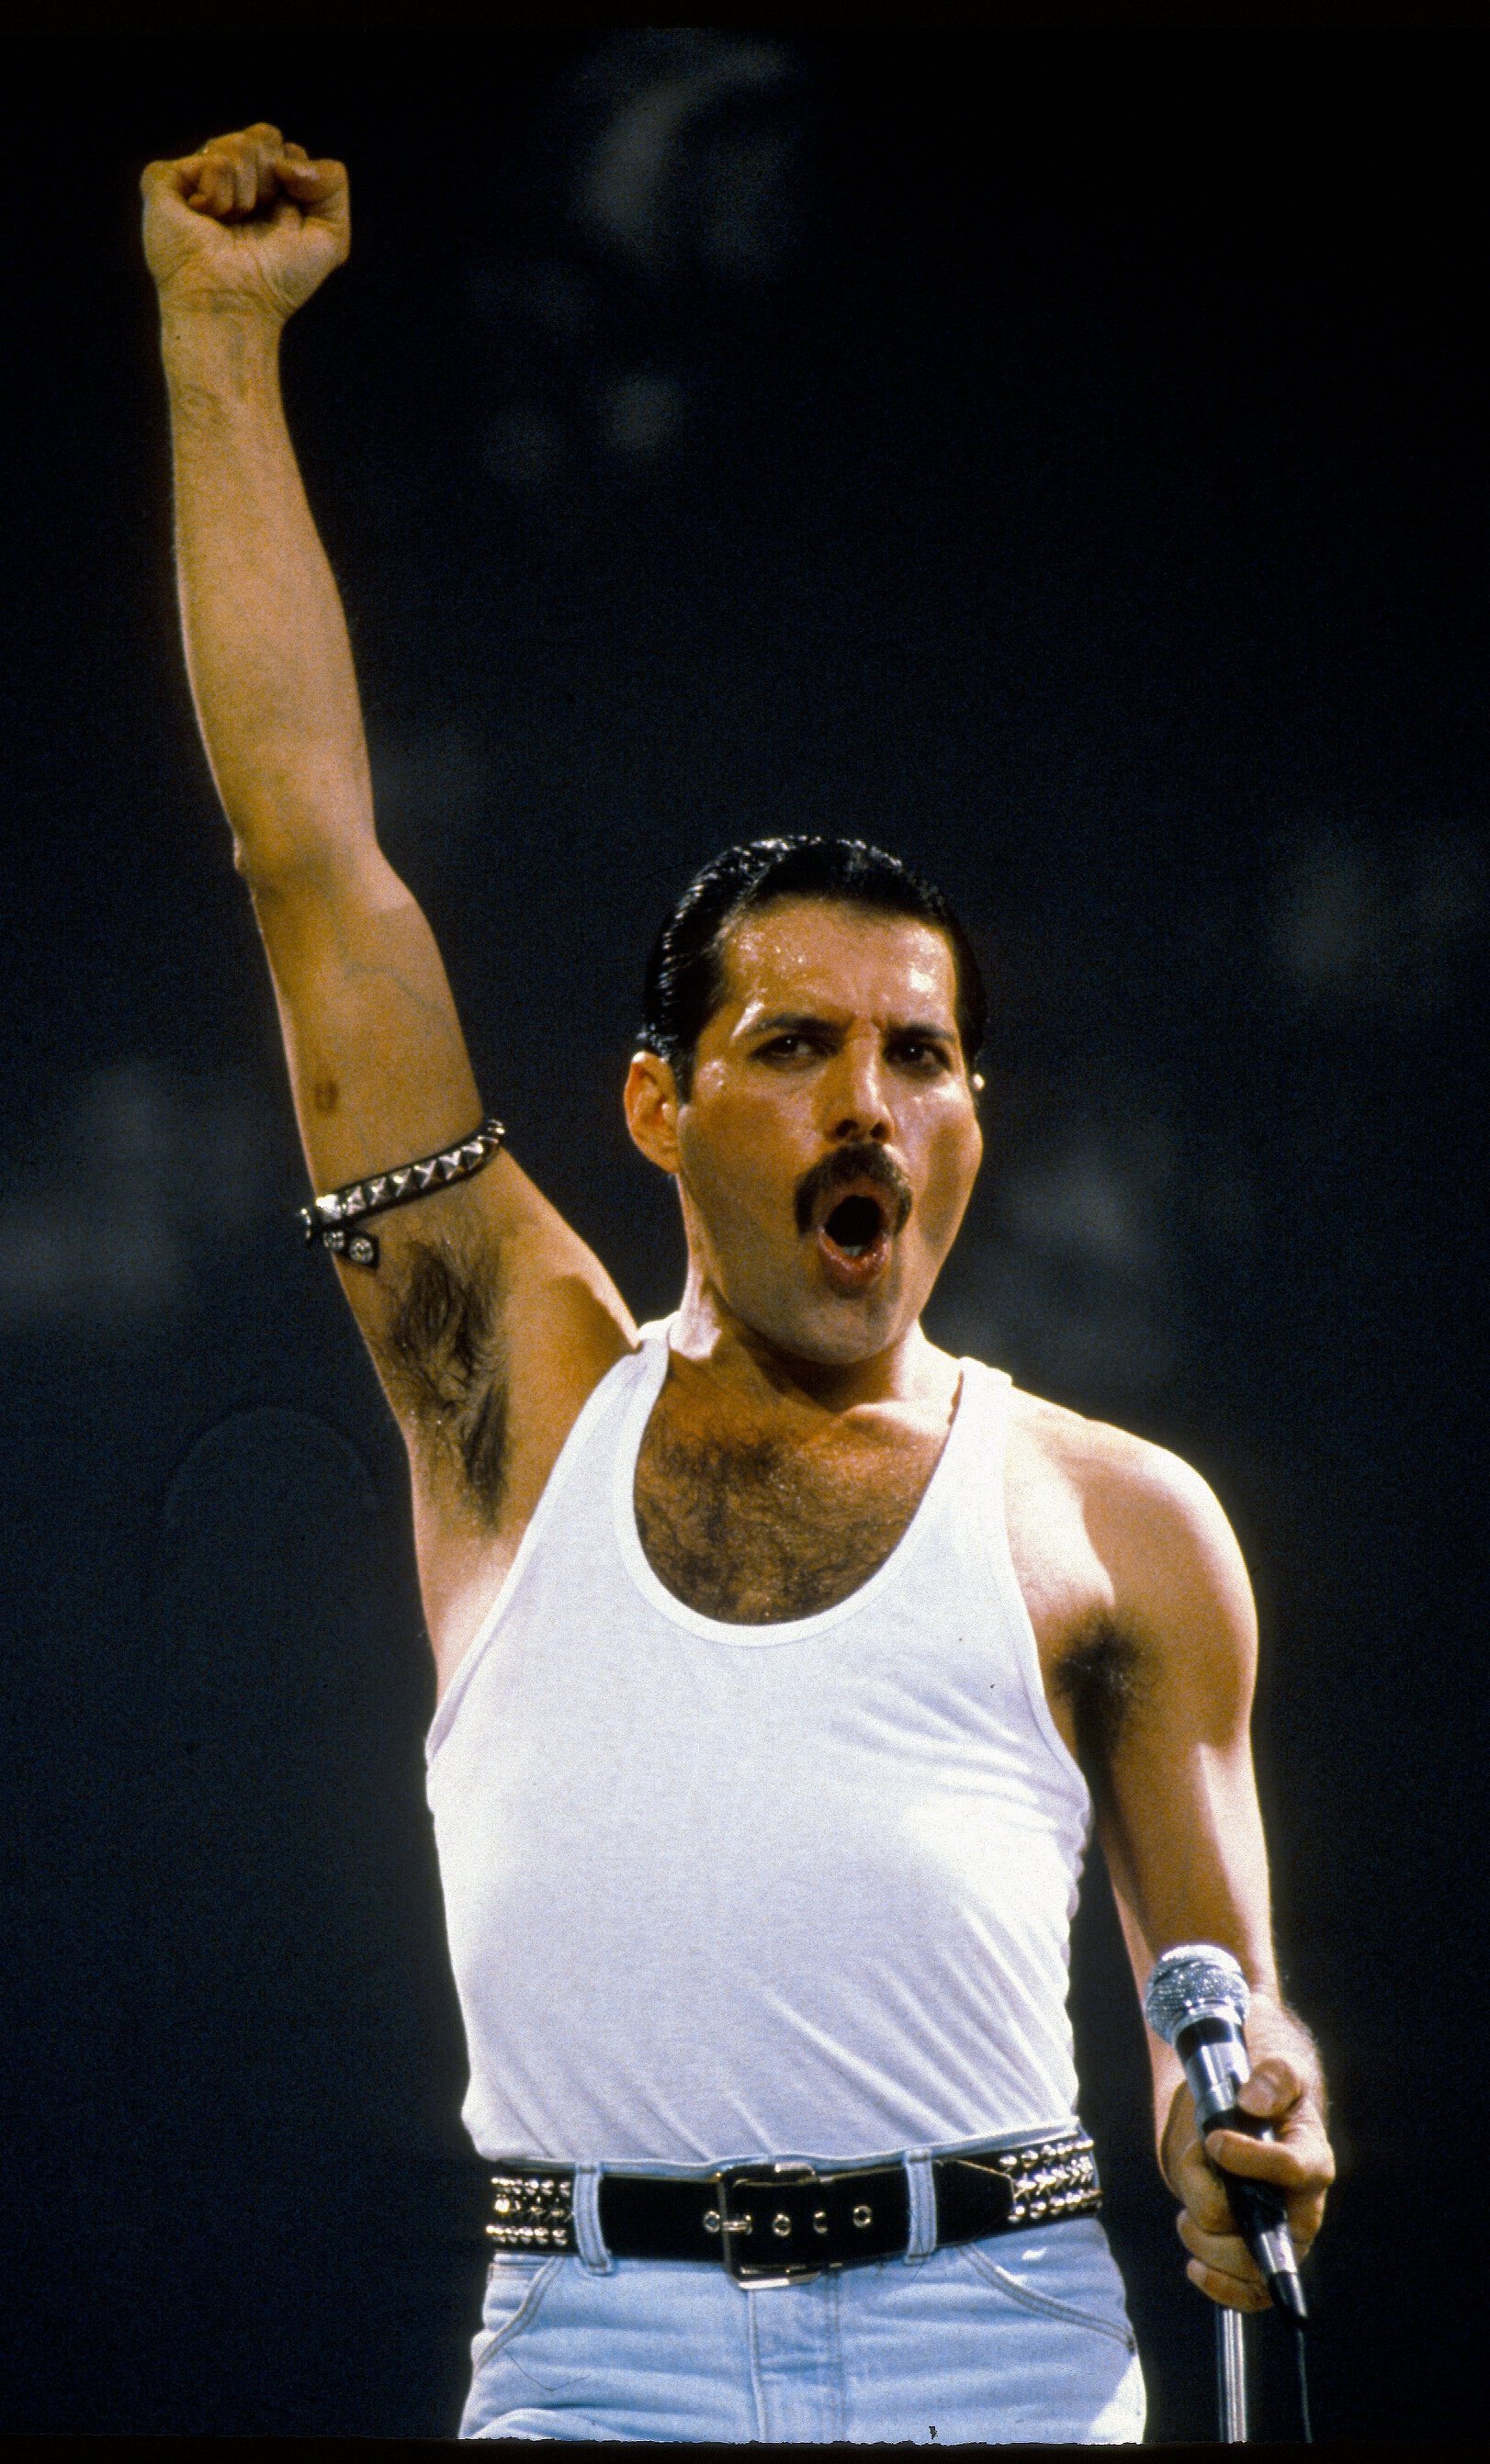 Freddie Mercury at the Live Aid concert on July 13, 1985 in London, England | Photo: Getty Images